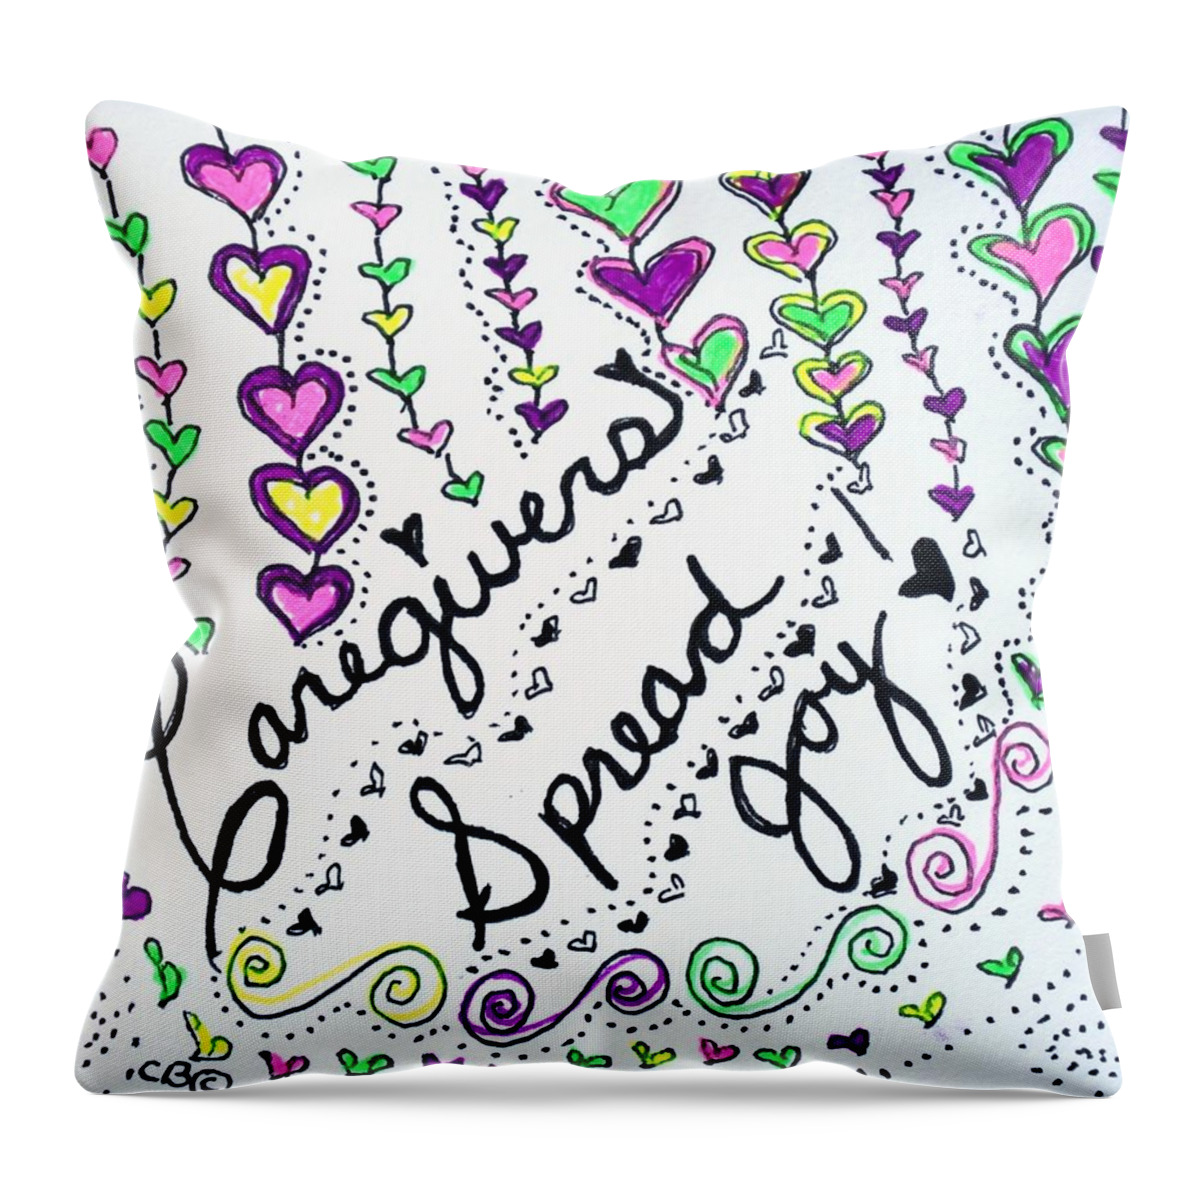 Caregiver Throw Pillow featuring the drawing Caregivers Spread Joy by Carole Brecht